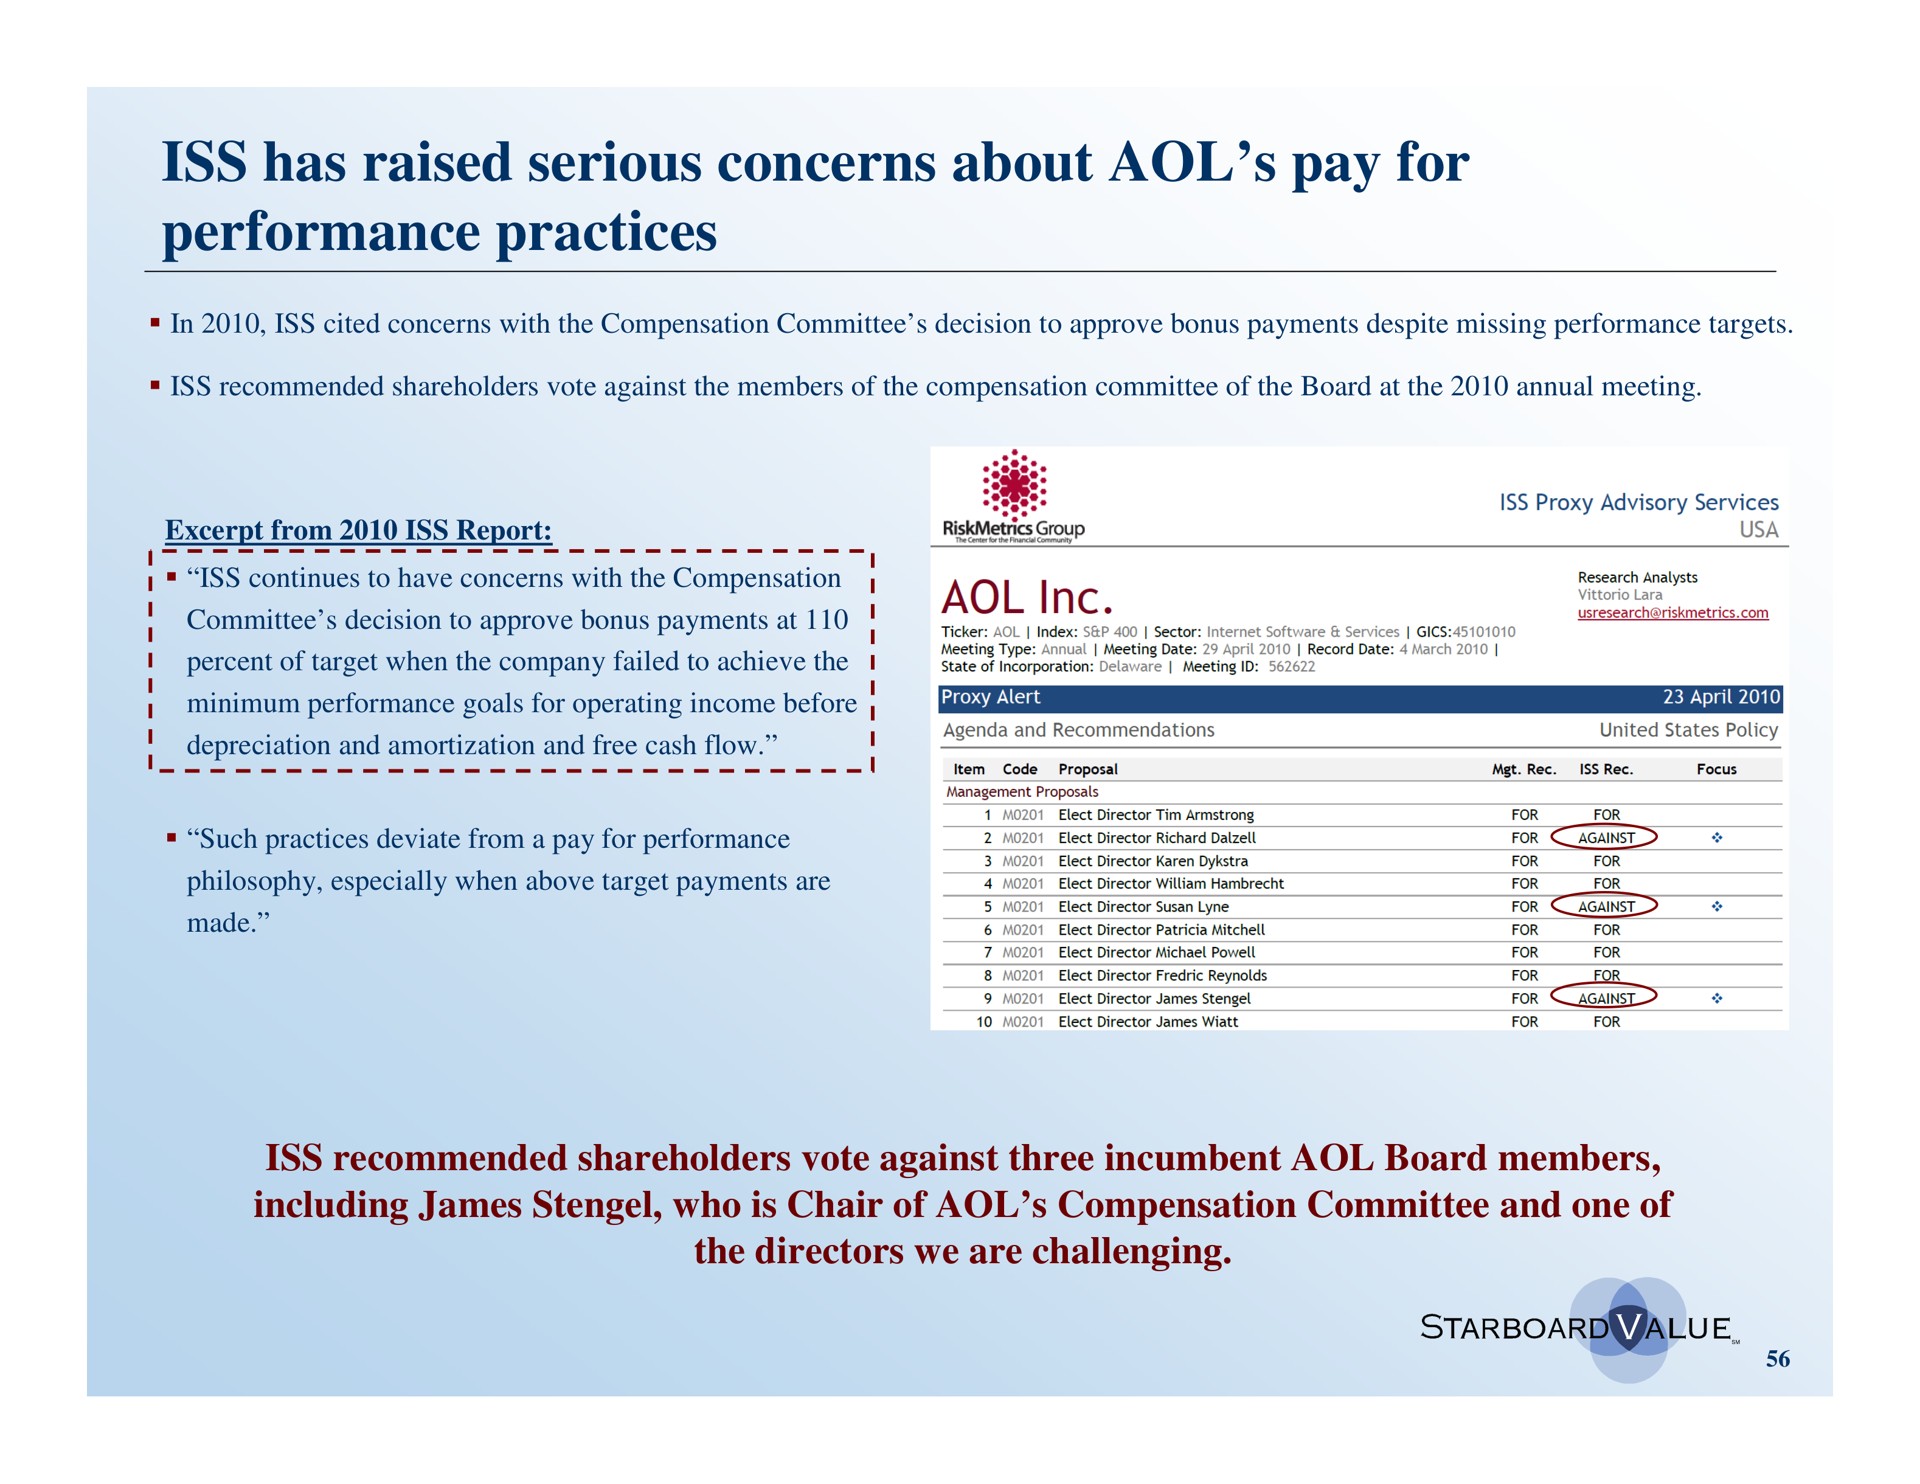 iss has raised serious concerns about pay for performance practices | Starboard Value